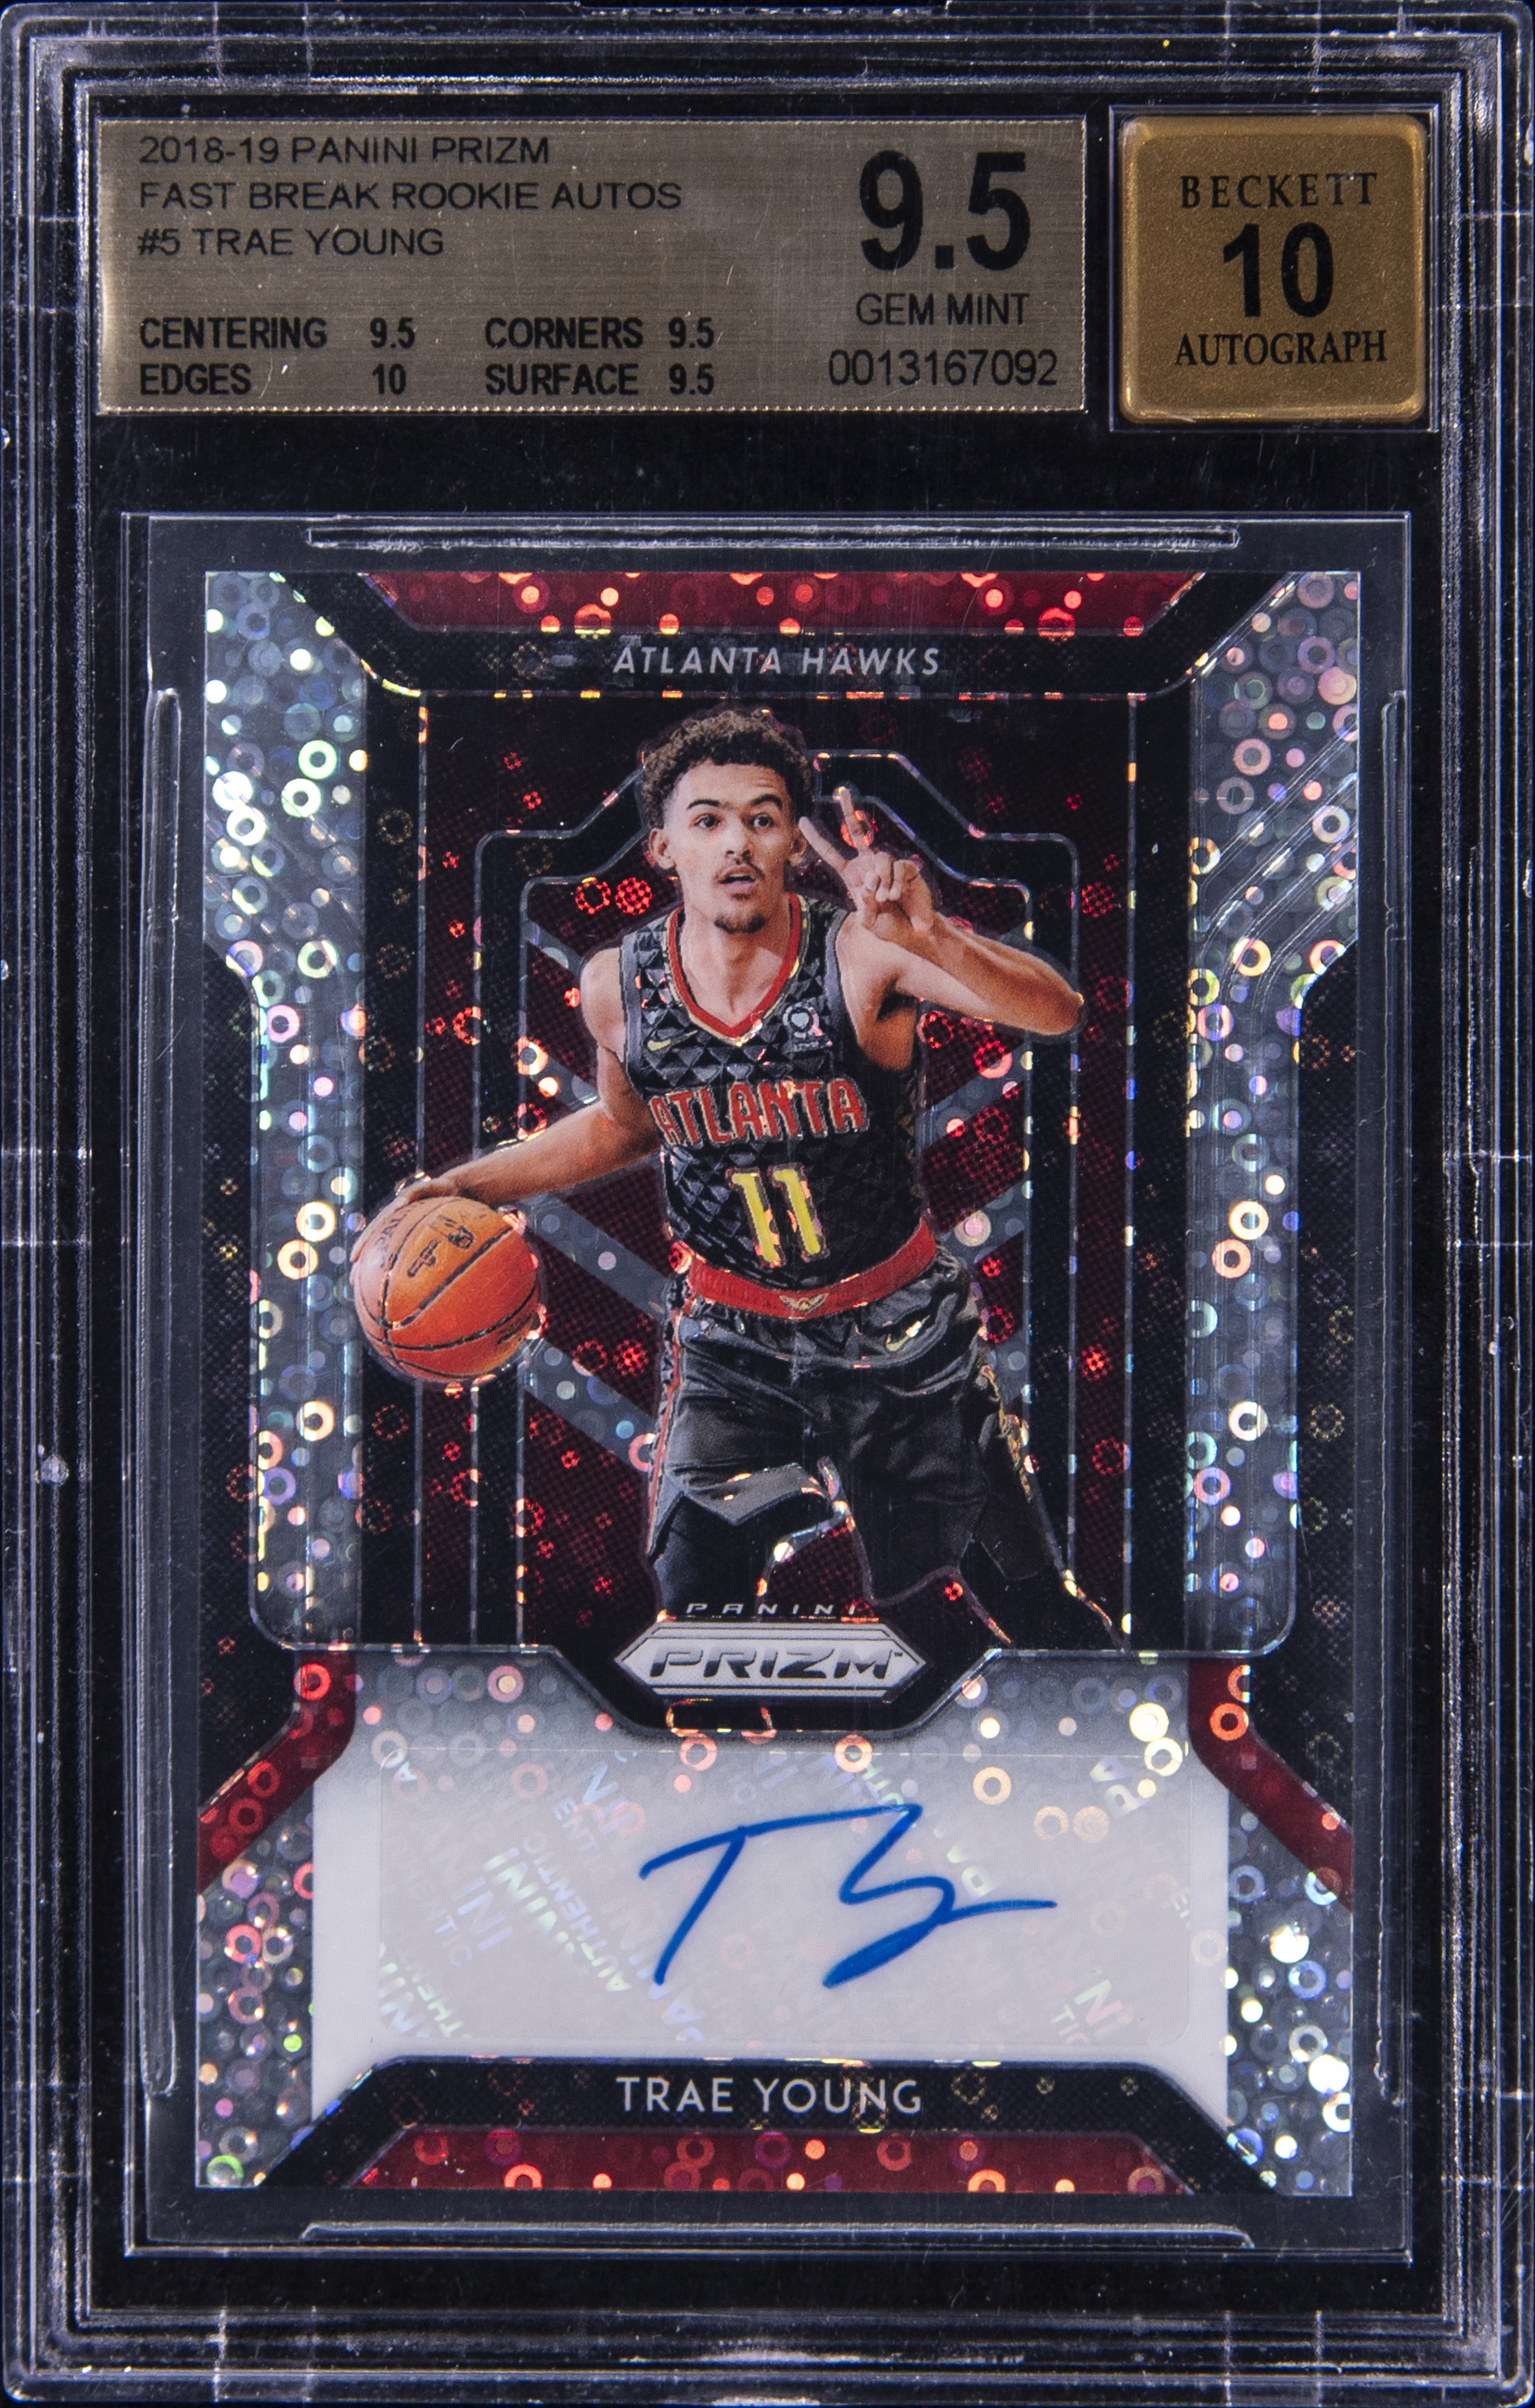 2018-19 Panini Prizm Fast Break Rookie Autogs 5 Trae Young Rookie Card – BGS GEM MINT 9.5